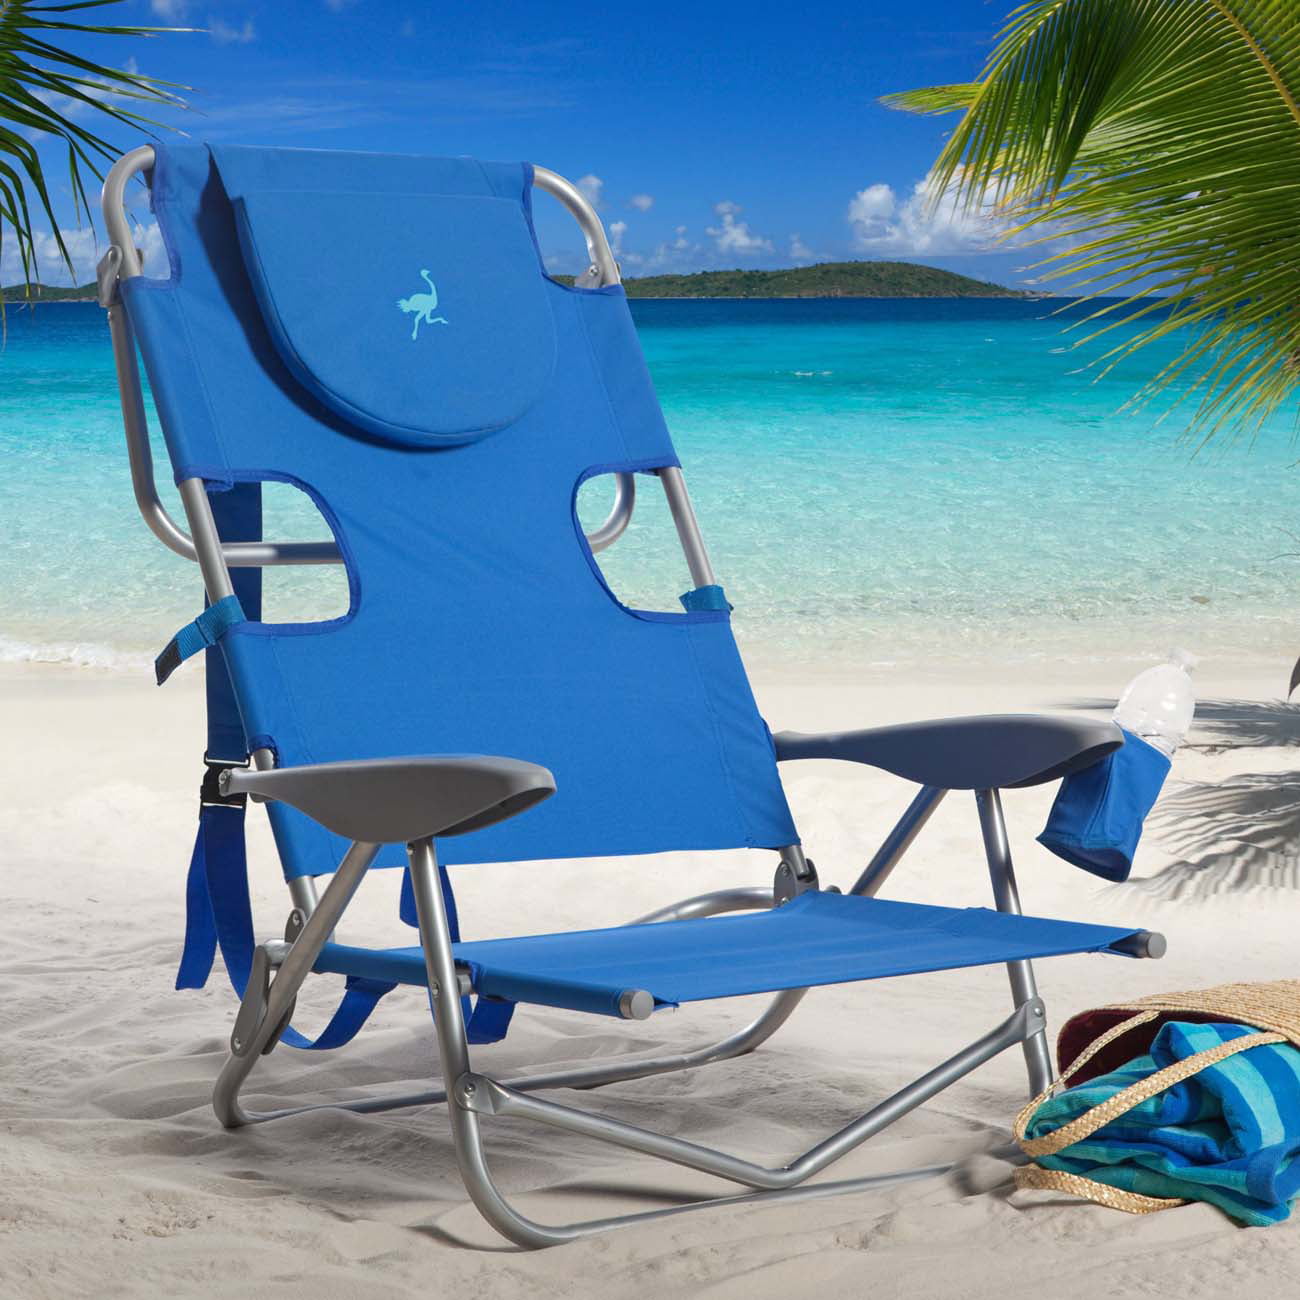 Simple Panama Jack Backpack Beach Chair for Small Space